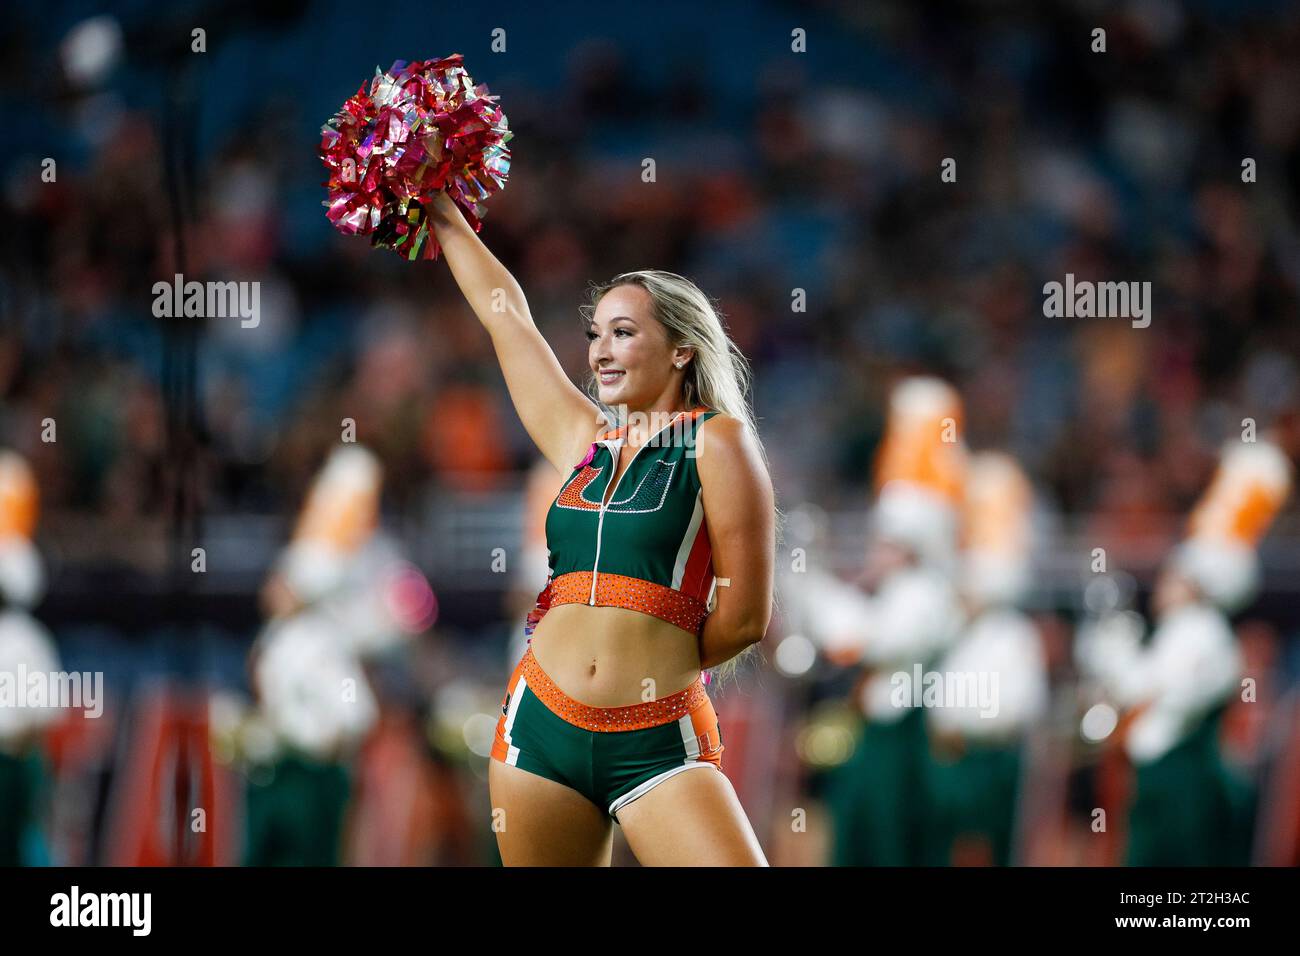 A Miami Hurricane cheerleader performs prior to a college football regular season game against the Georgia Tech Yellow Jackets, Saturday, October 7, 2 Stock Photo